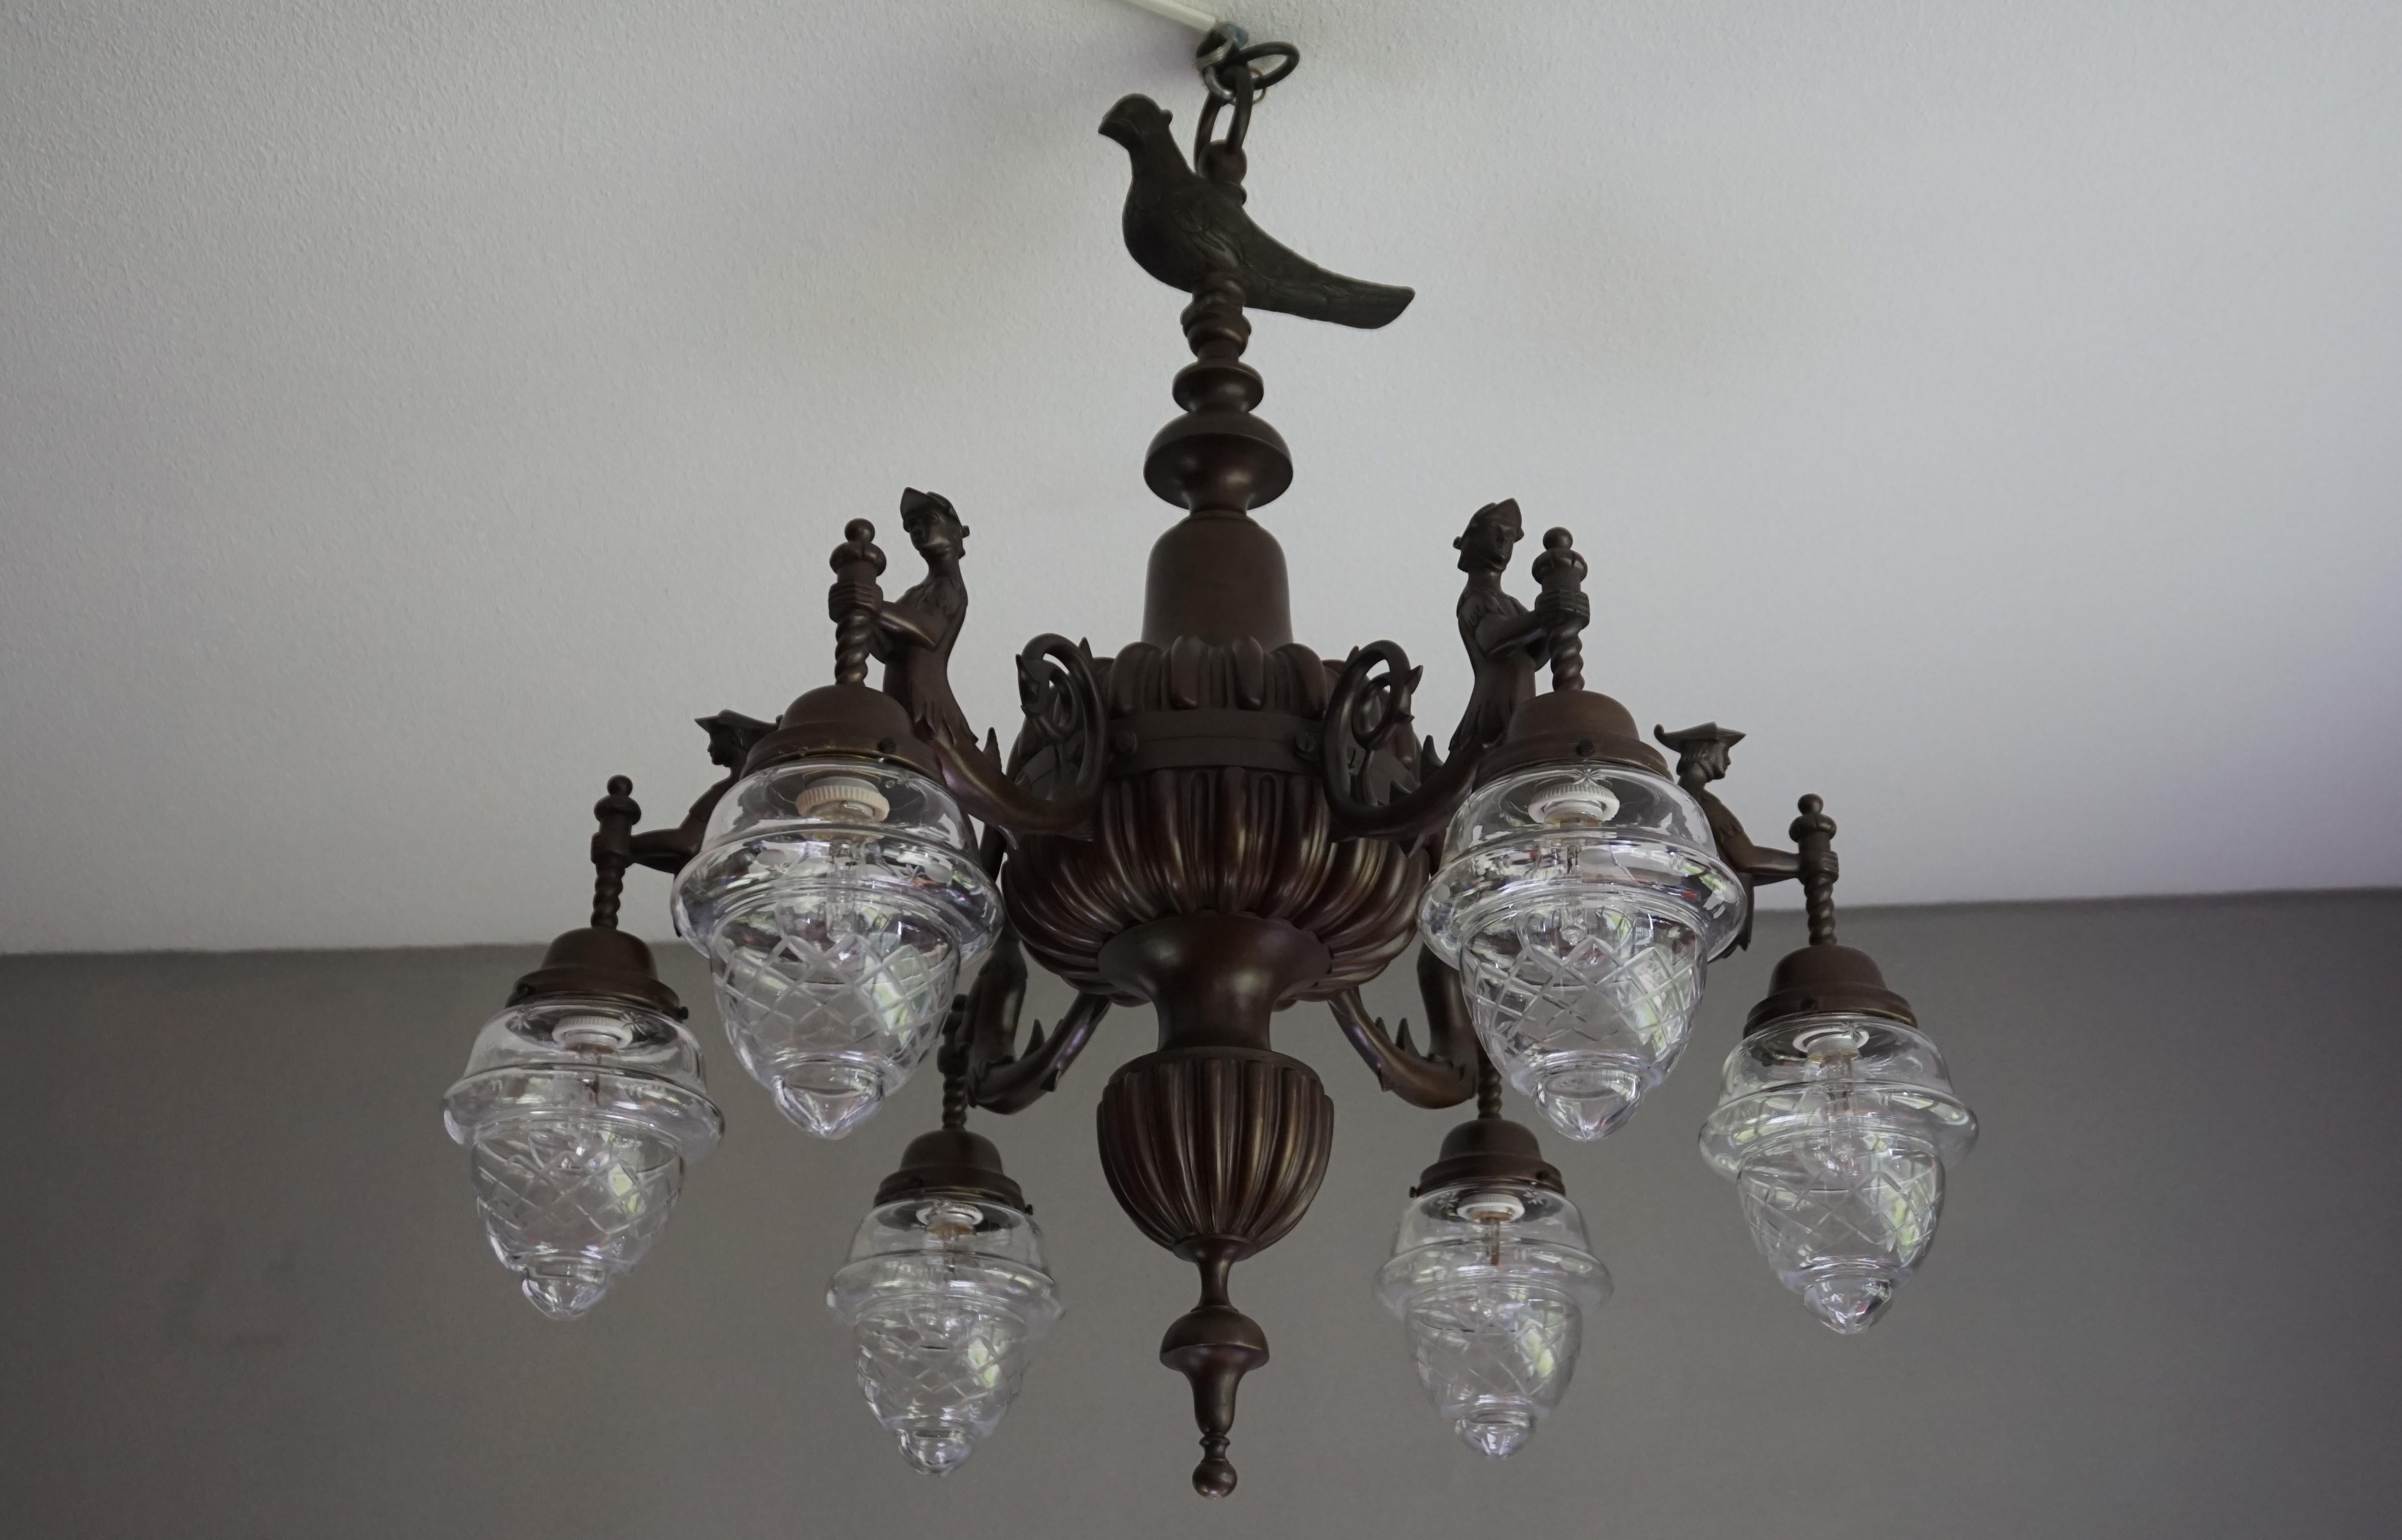 Hand-Crafted Large Six-Light Bronze Chandelier with Folkore or Fable Hybrid Guard Sculptures For Sale